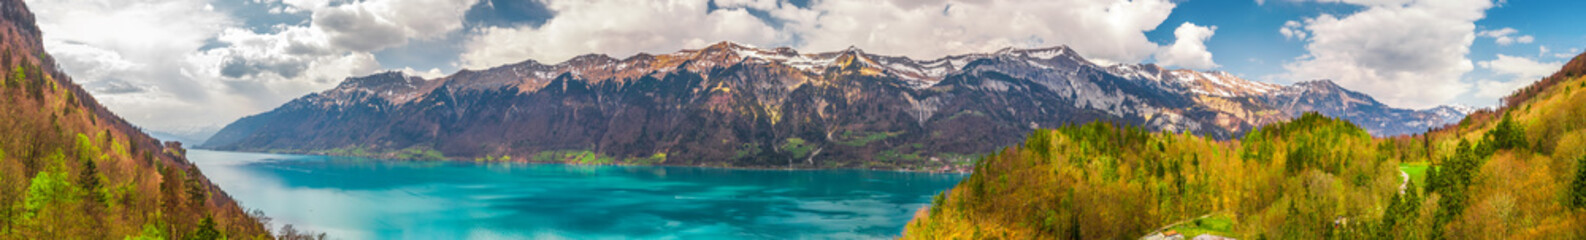 Lake Brienz wir Giessbach woterfall by Interlaken with the Swiss Alps covered by snow in the background, Switzerland, Europe